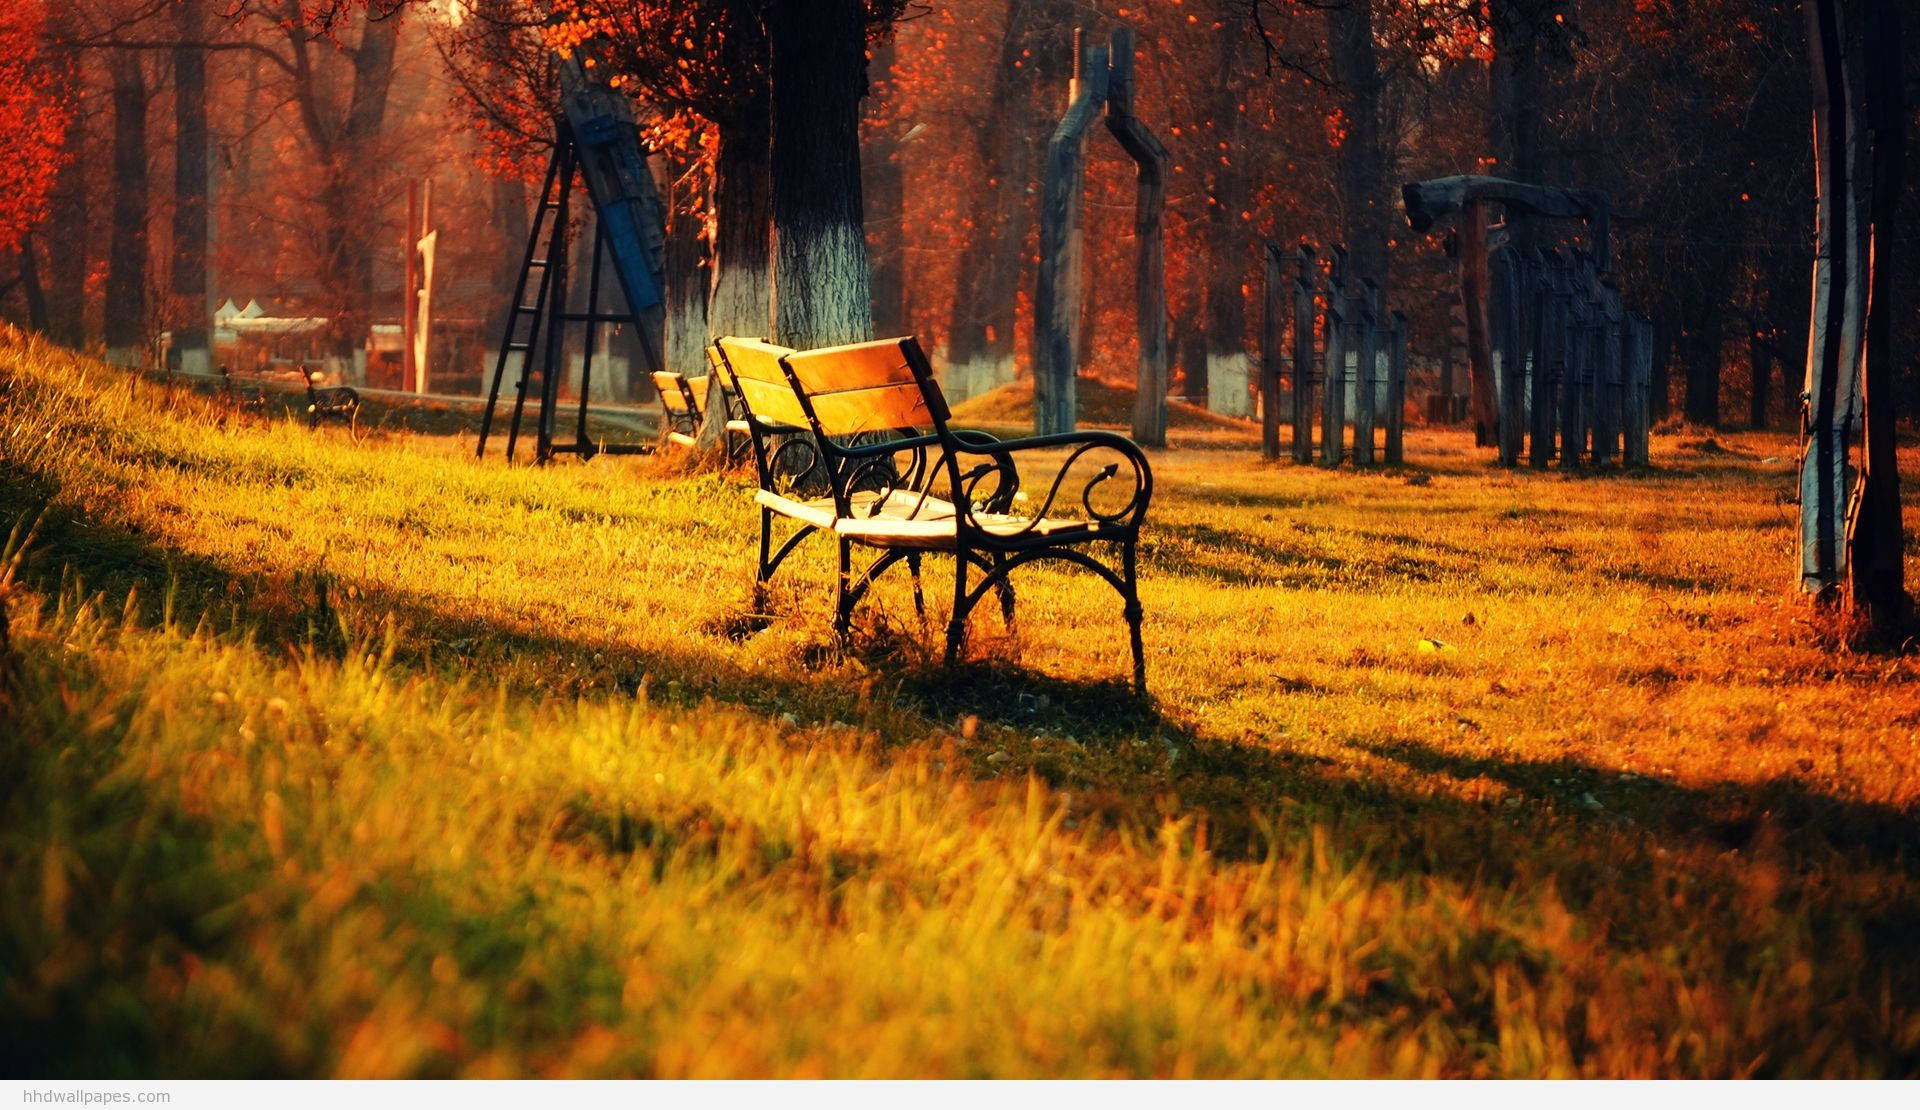 1920x1080 Full Hd Nature Bench In Autumn Wallpaper